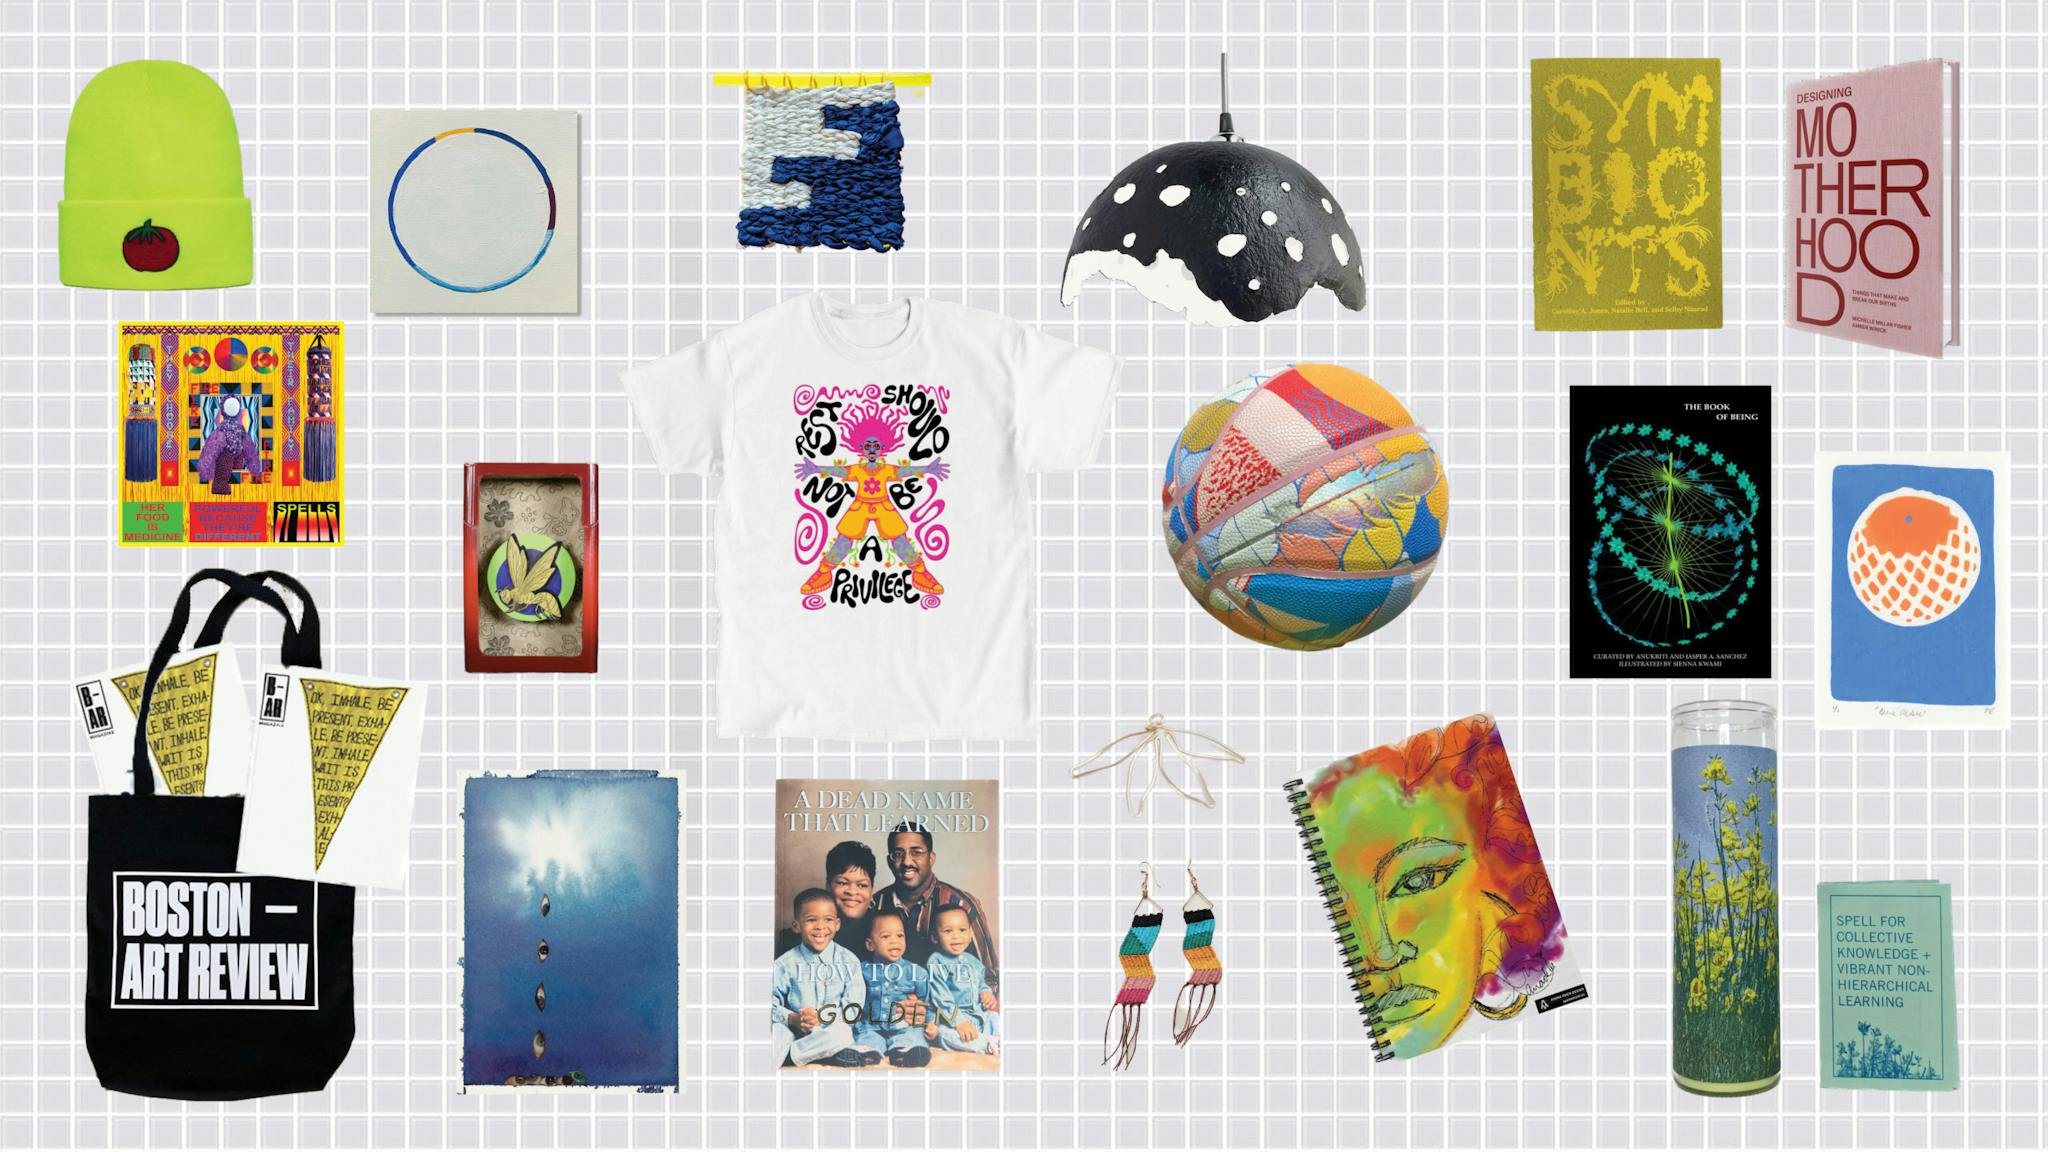 A display of holiday gifts to purchase, including a black BAR tote bag and a T-shirt.